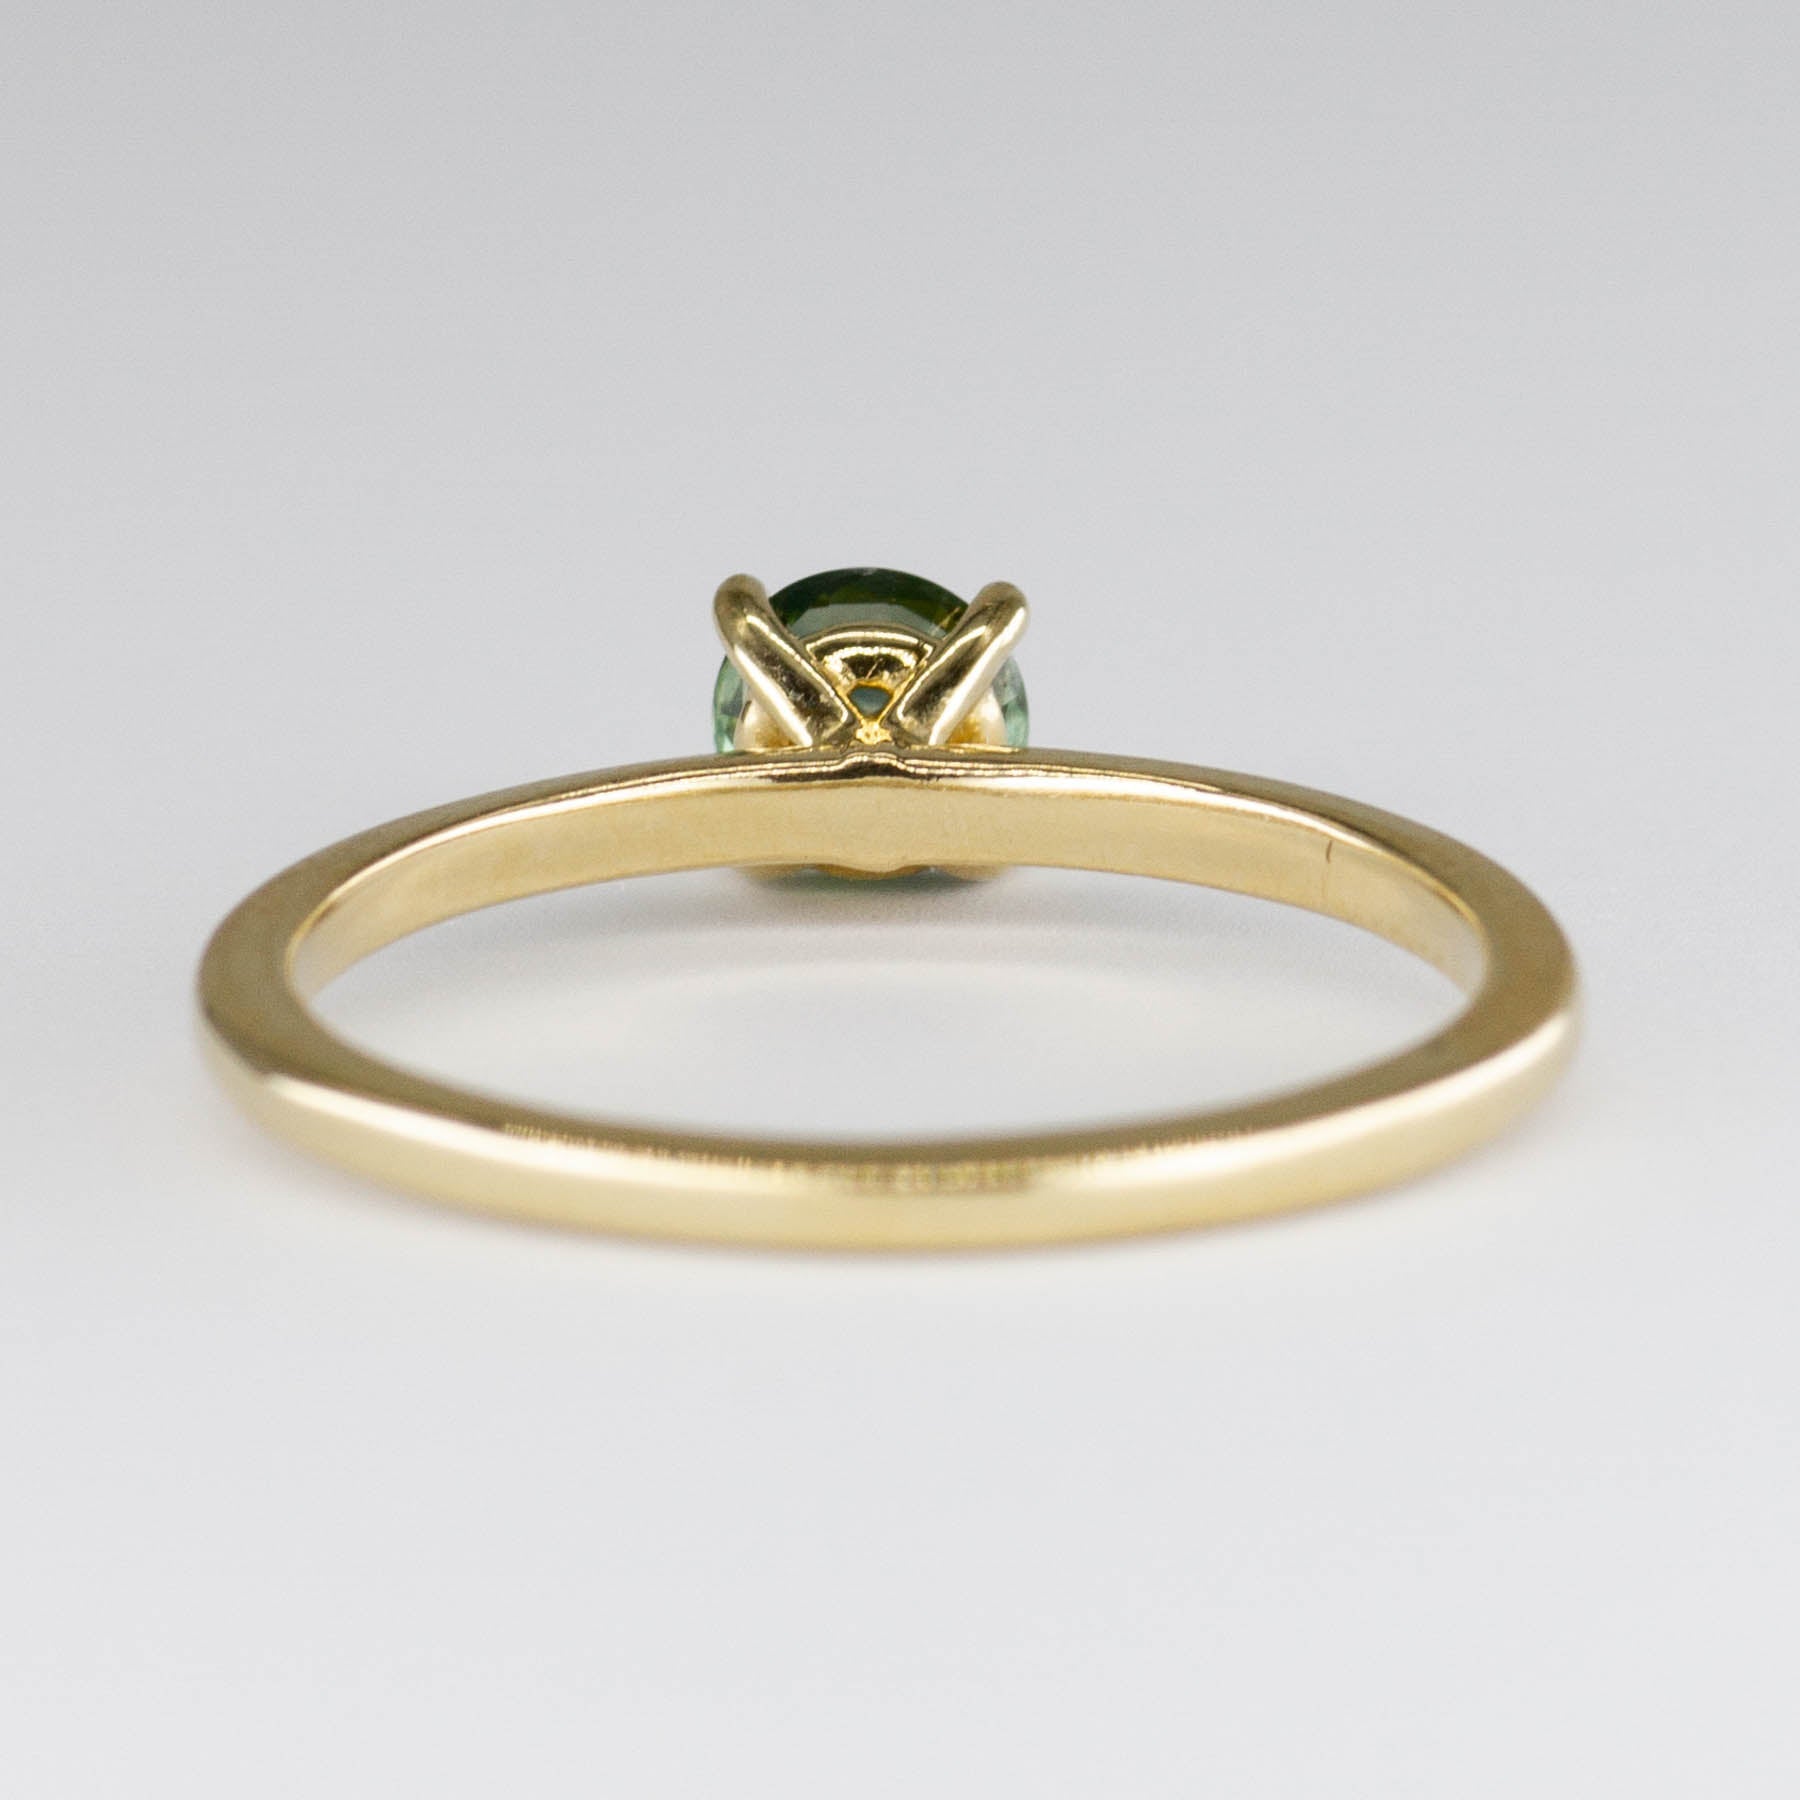 100 Ways' 14k Yellow Gold Sapphire Solitaire Ring | 0.25ct | SZ 6.75 - 100 Ways